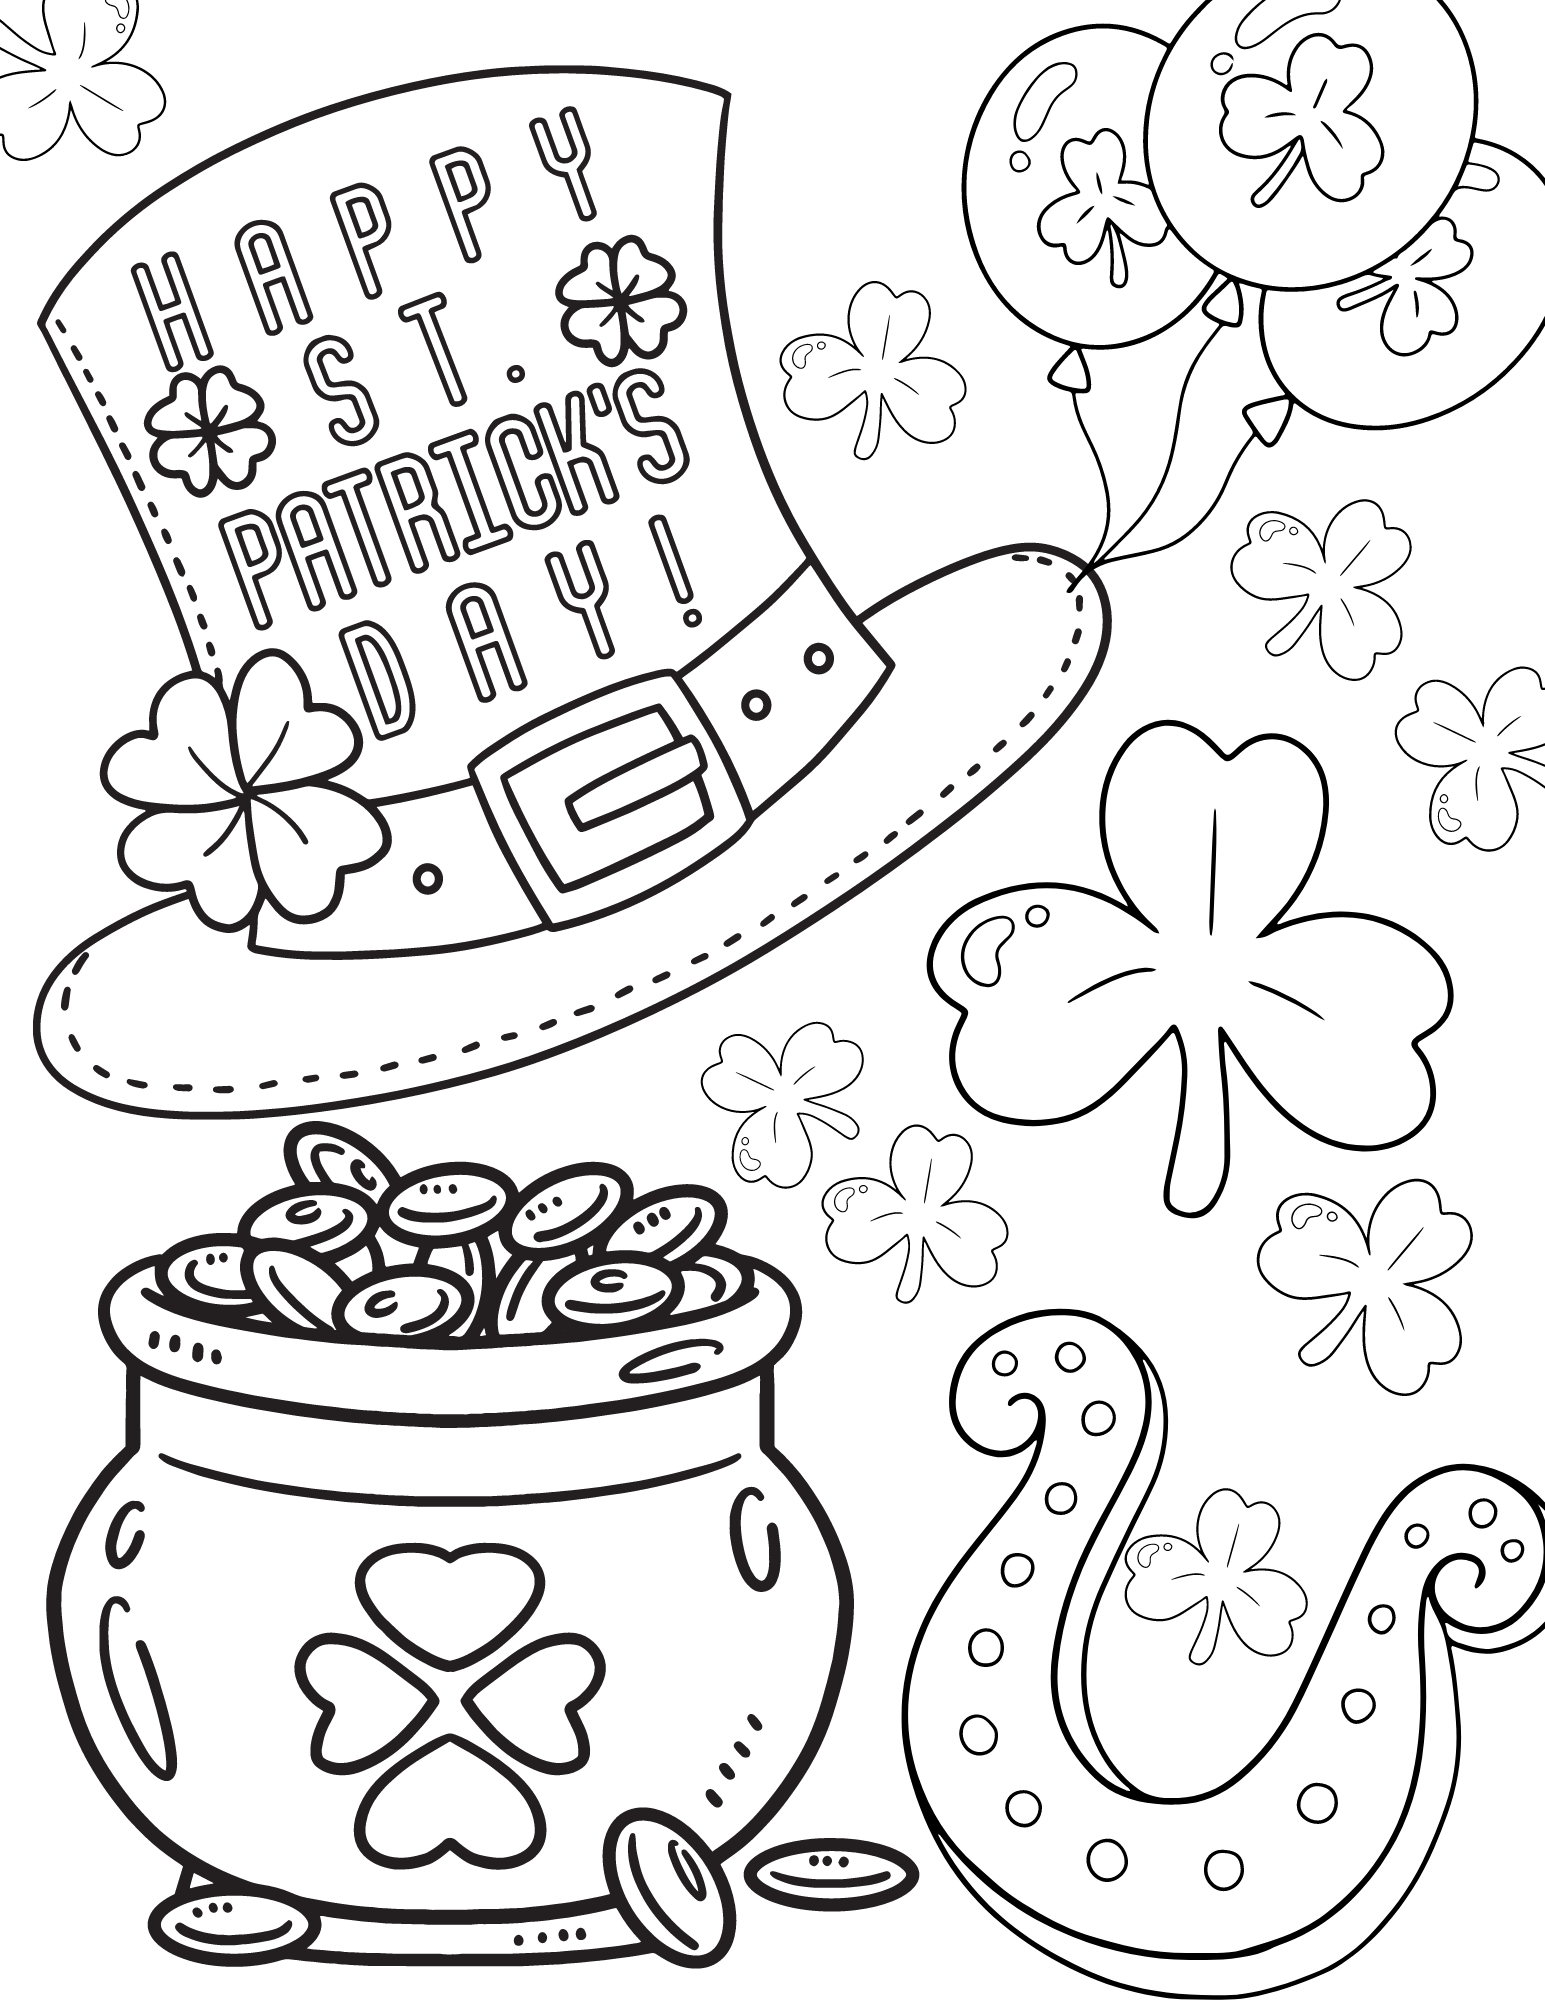 Free Printable St Patrick’s Day Coloring Pages | AllFreePaperCrafts.com